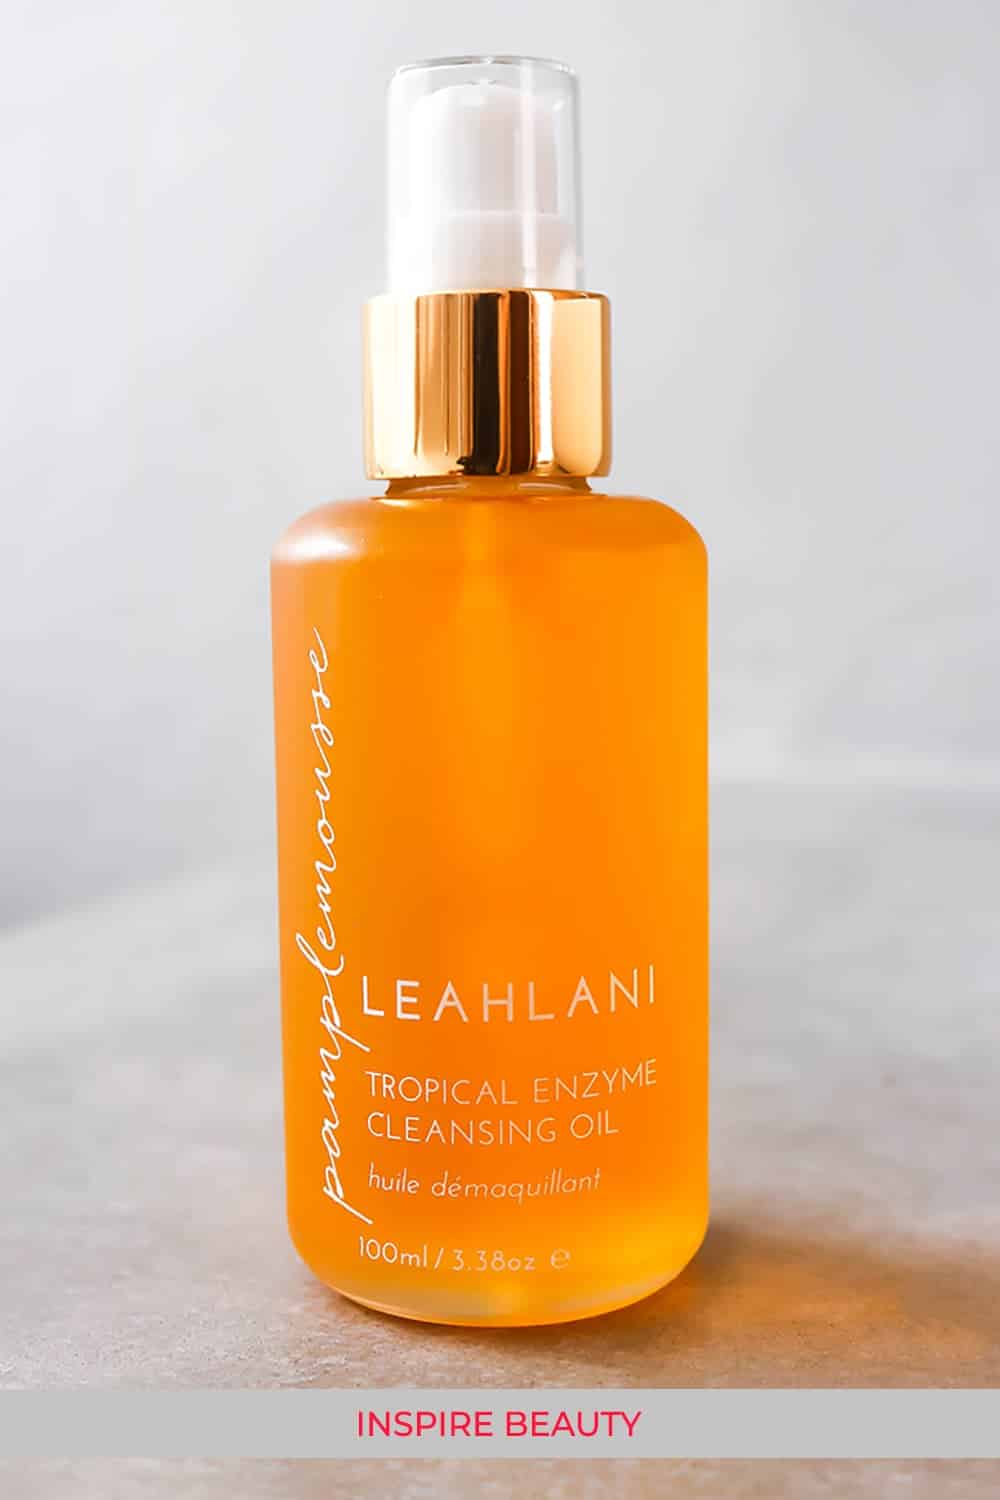 Leahlani Pamplemousse Tropical Enzyme Cleansing Oil review.